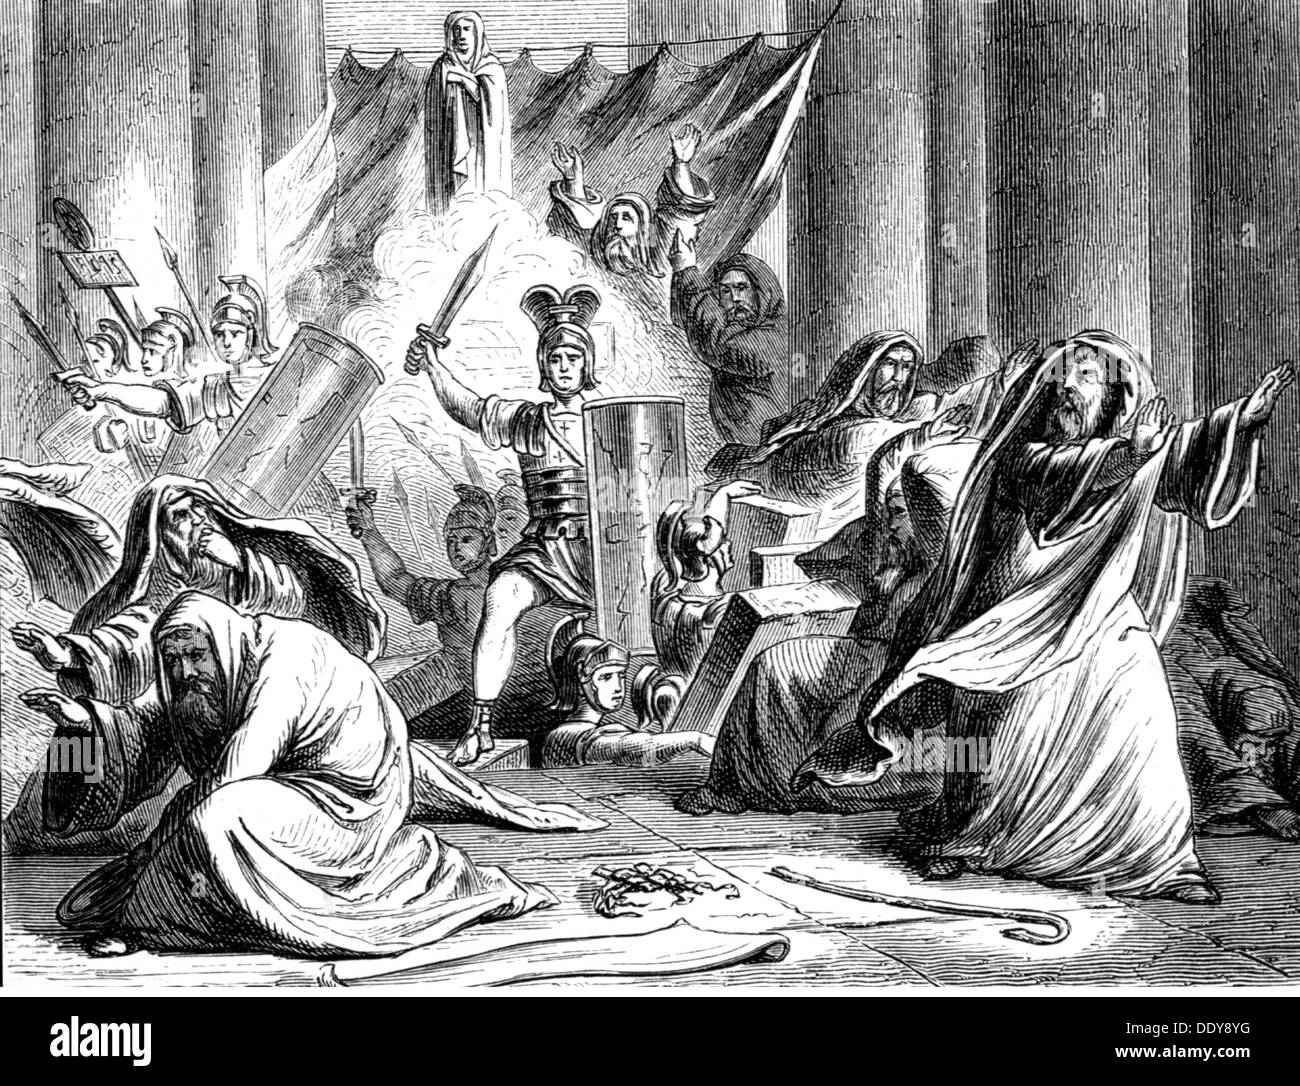 ancient world, Roman Empire, conquest of Veii, 396 BC, wood engraving, 19th century, Roman Republic, war, wars, Etruscan, Etruscans, temple, temples, tunnel, tunnels, priest, priests, seizure, Roman, Romans, 4th century BC, people, men, man, myth, myths, legend, saga, legends, sagas, ancient world, ancient times, conquest, conquests, historic, historical, ancient world, Additional-Rights-Clearences-Not Available Stock Photo